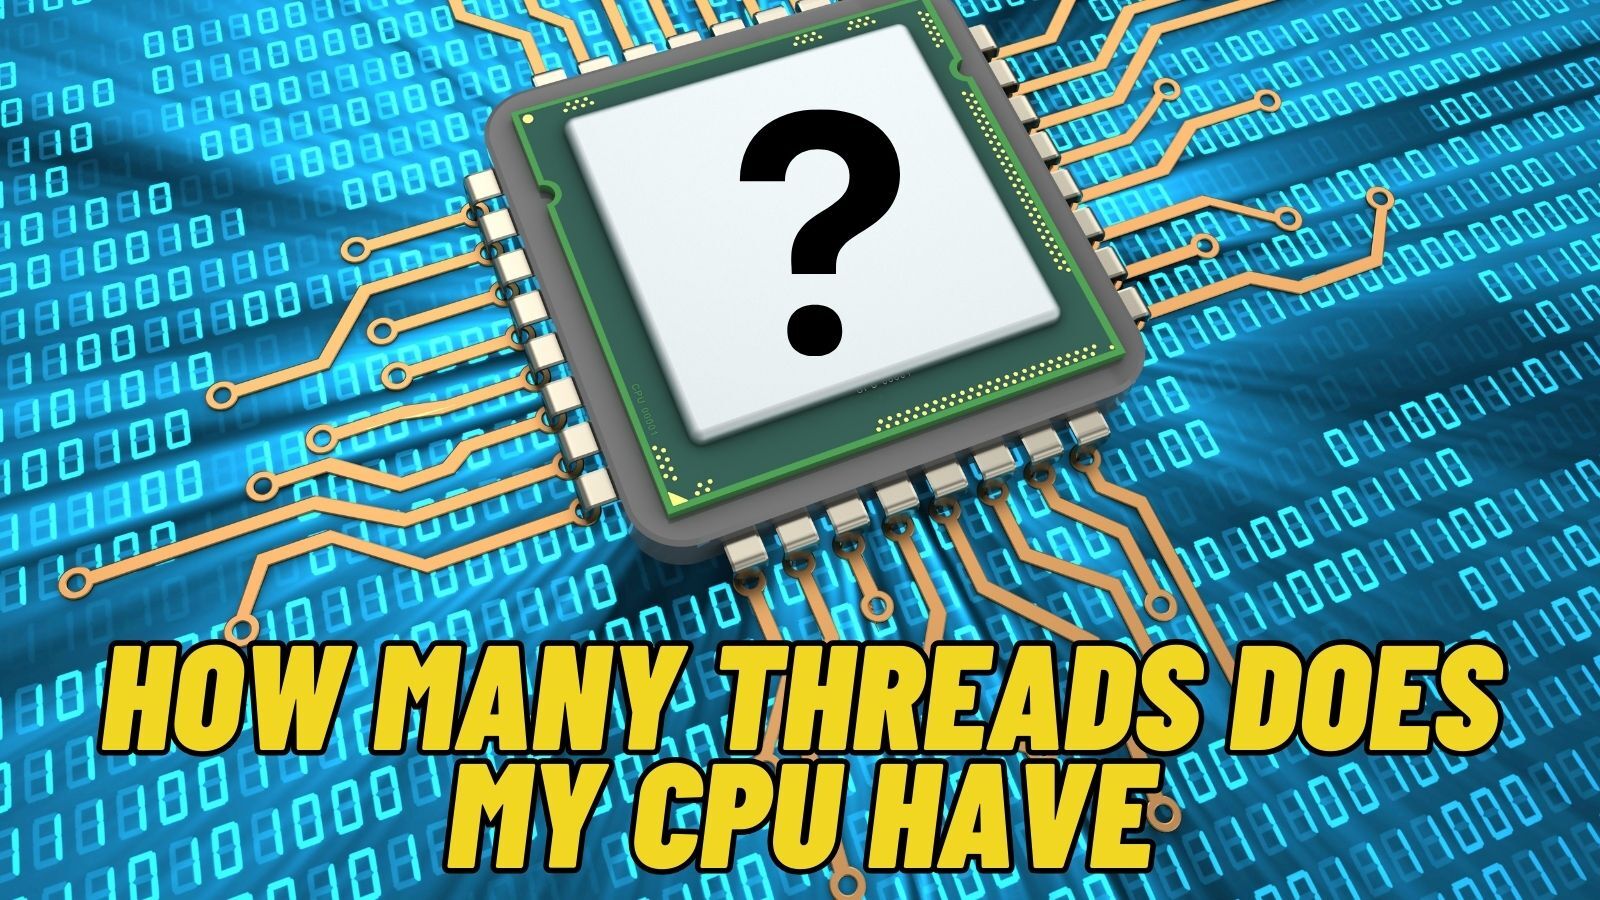 4 Ways to Check How Many Threads Does My CPU Have